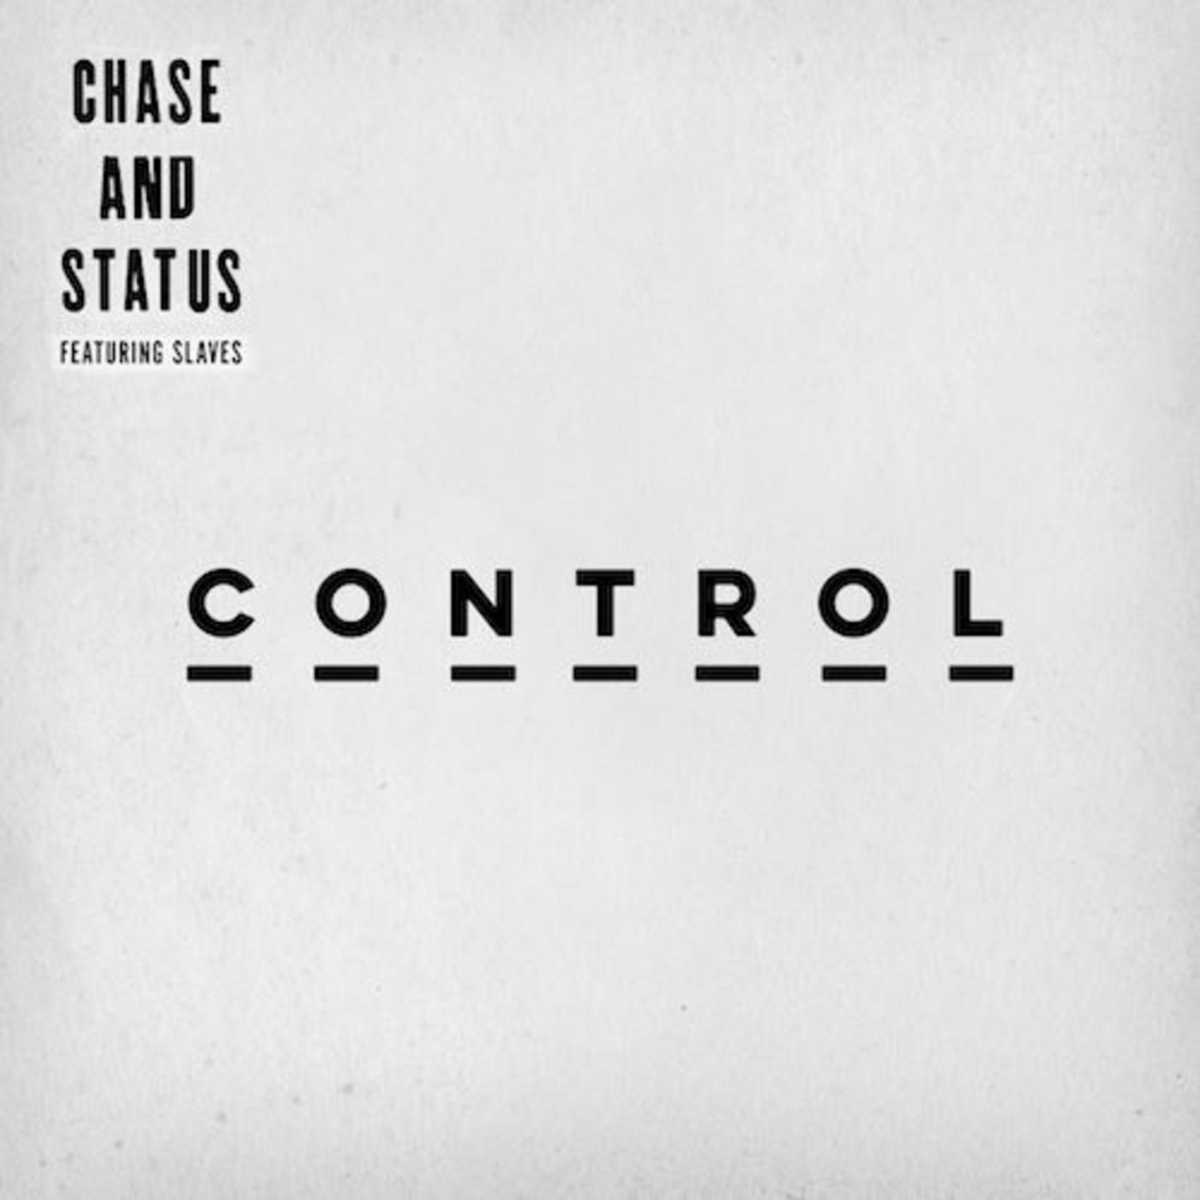 Chase & Status - Control ft. Slaves